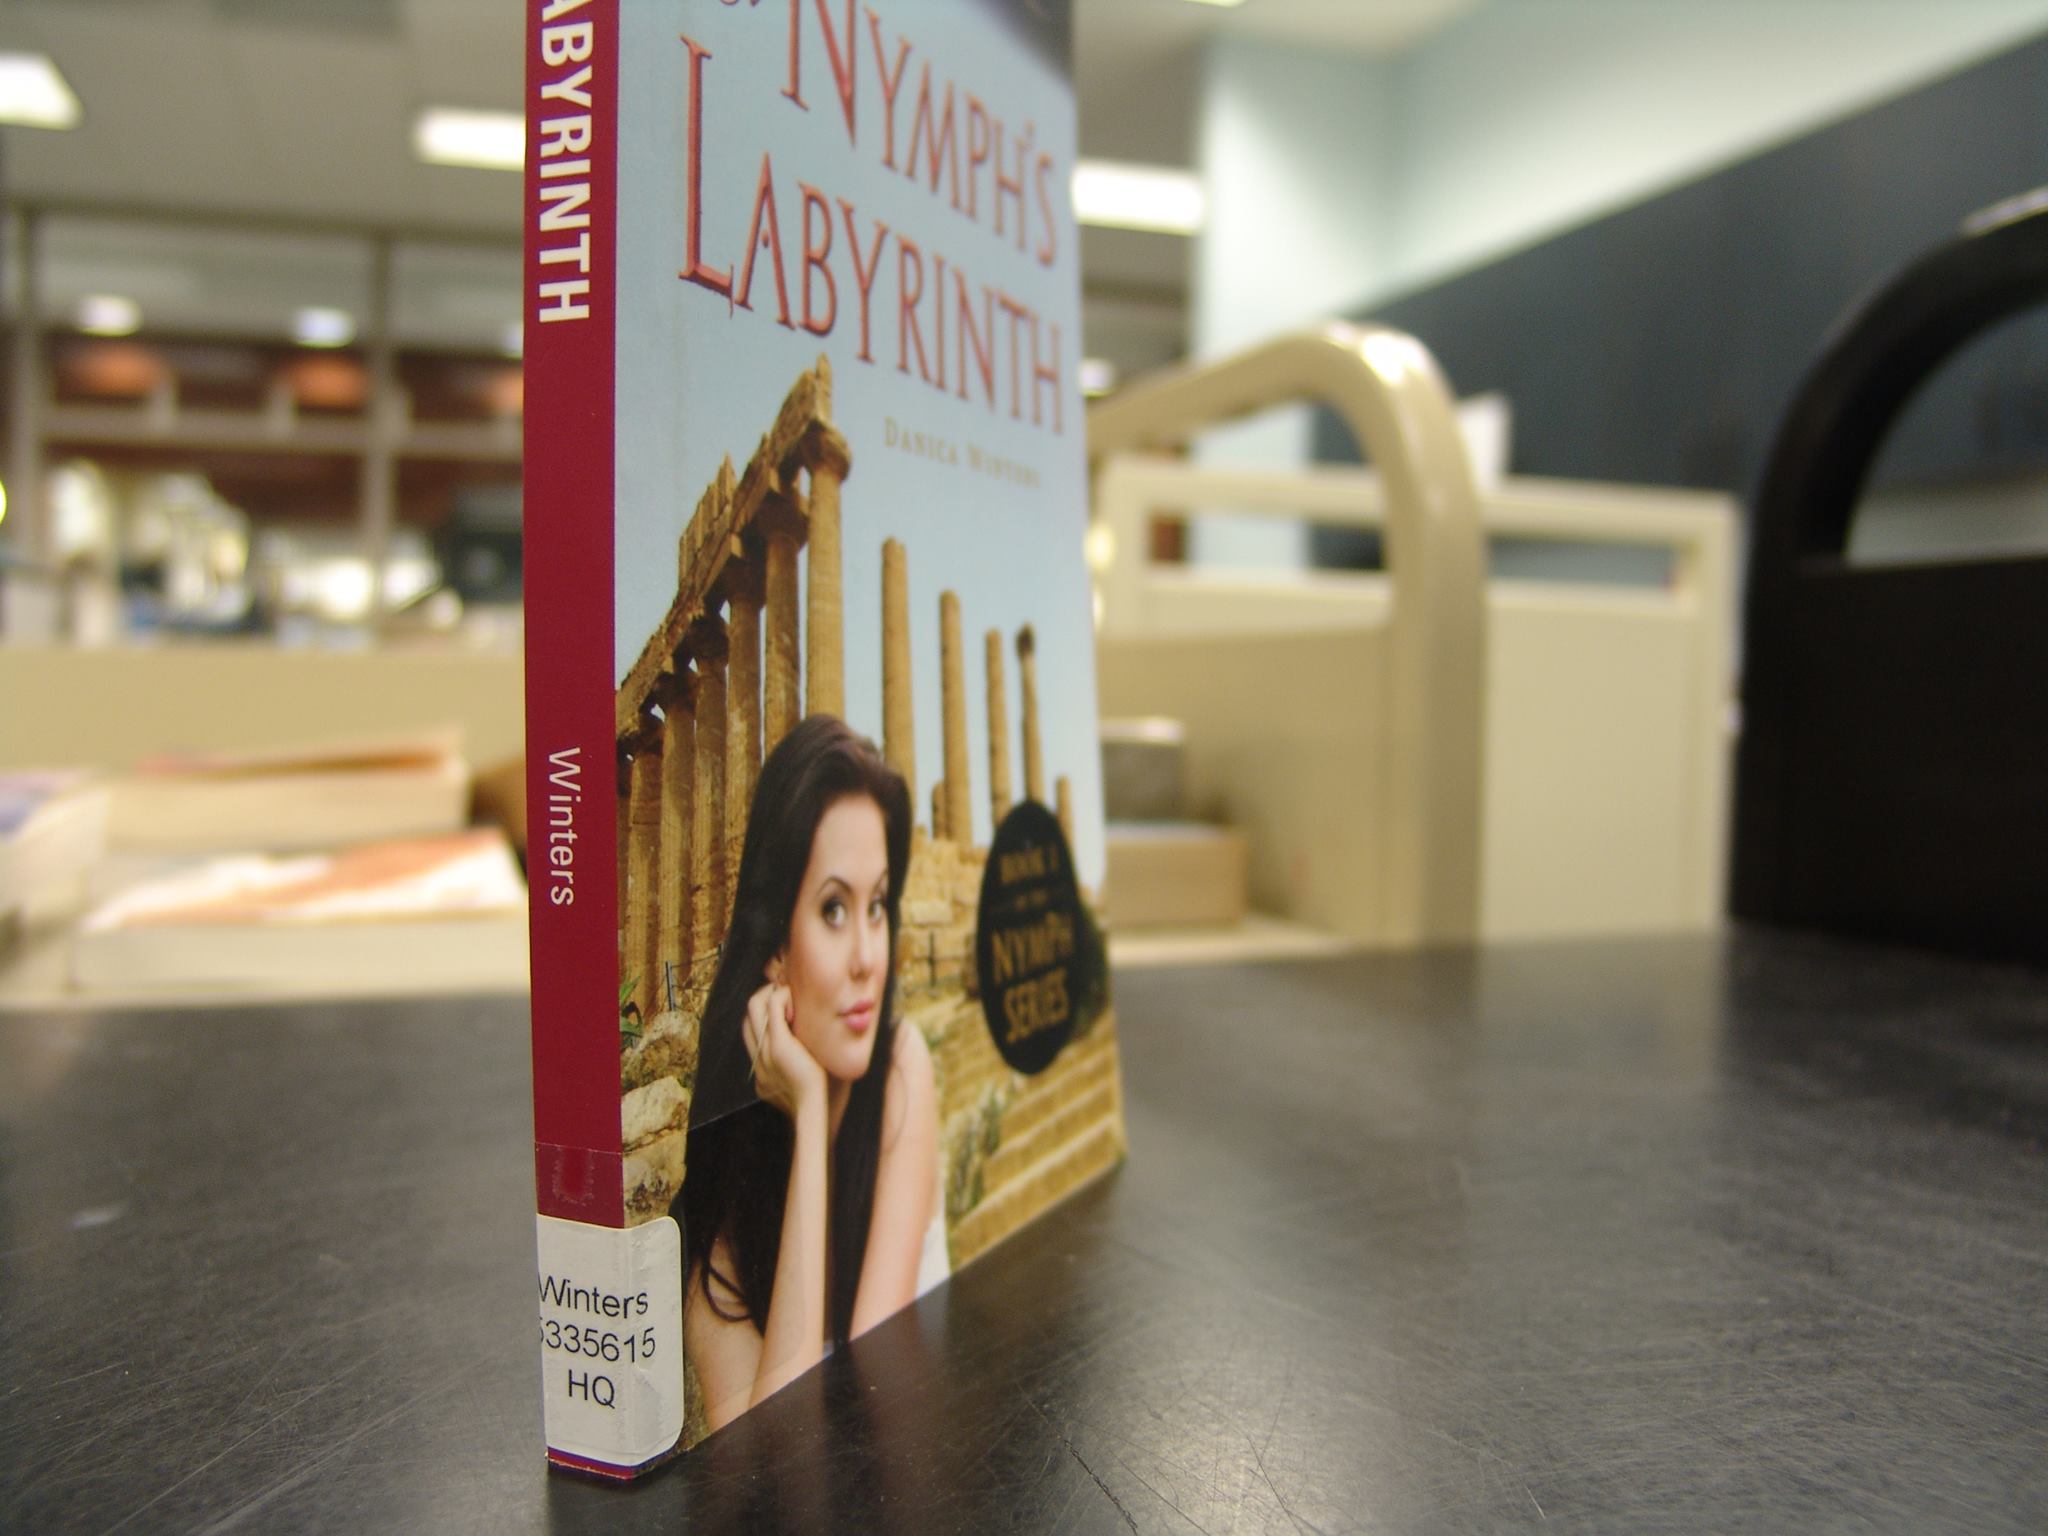 nymph's labryinth in library